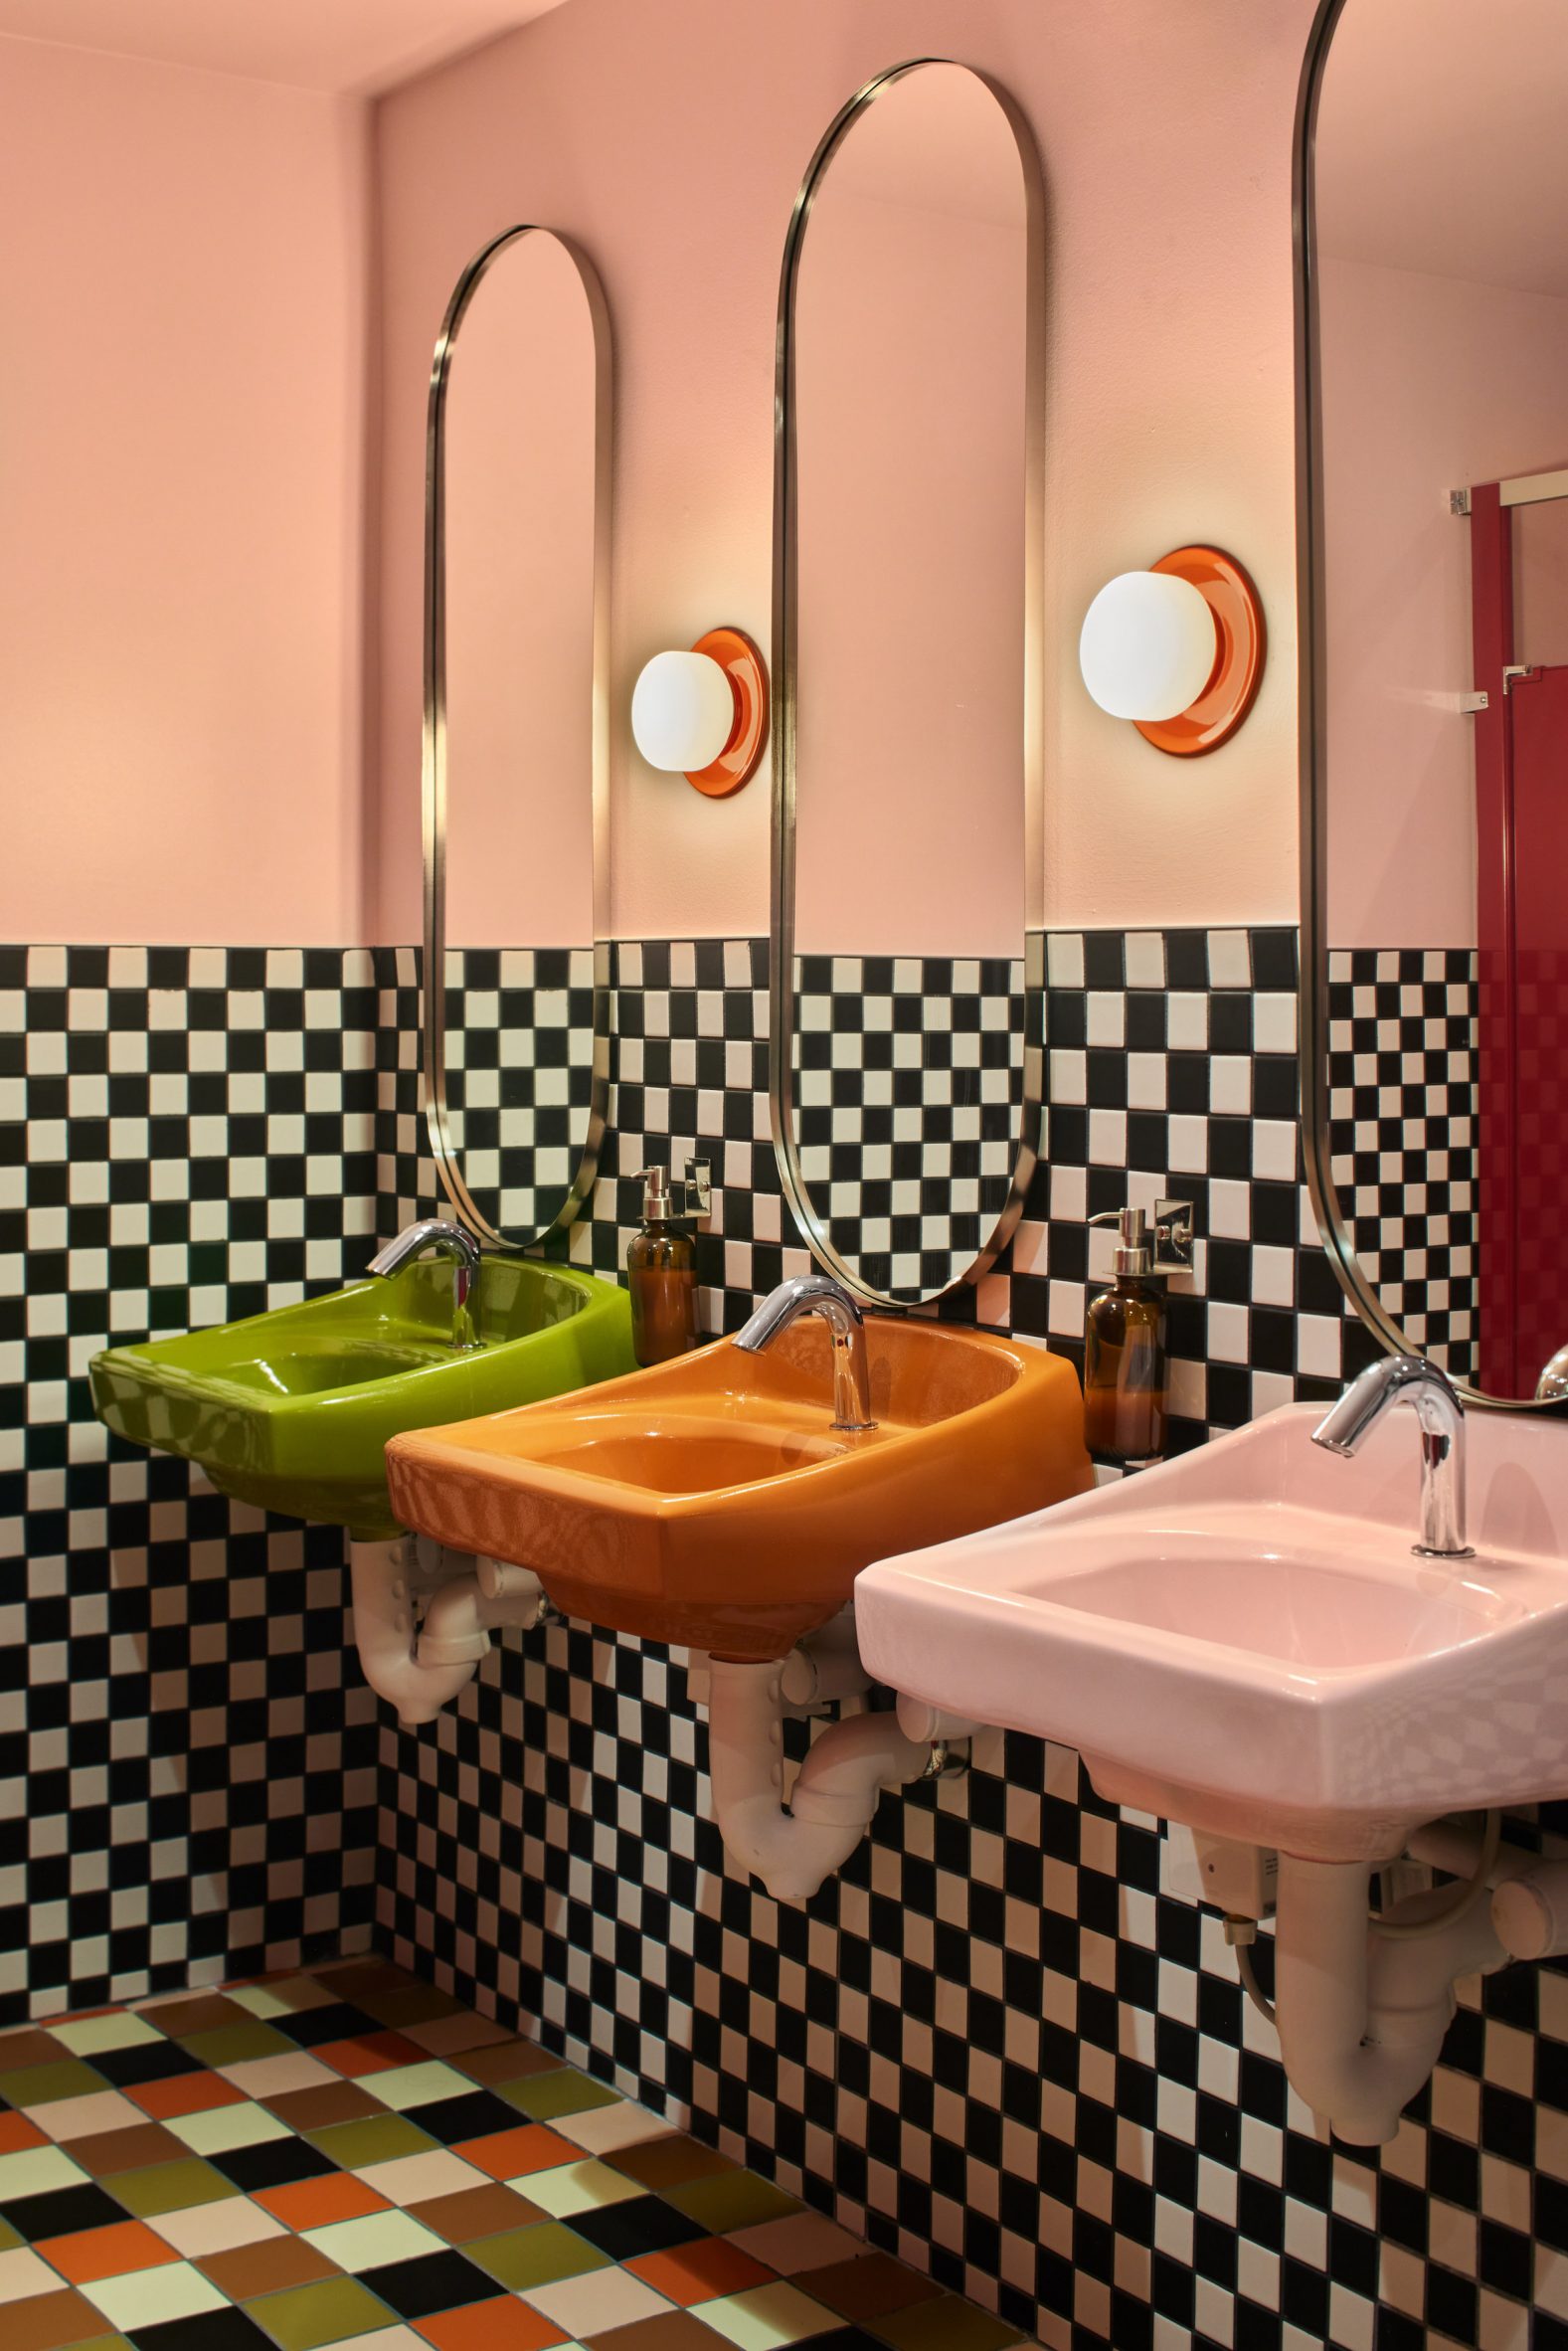 Bathroom with checkerboard tiles, coloured sinks and pill-shaped mirrors